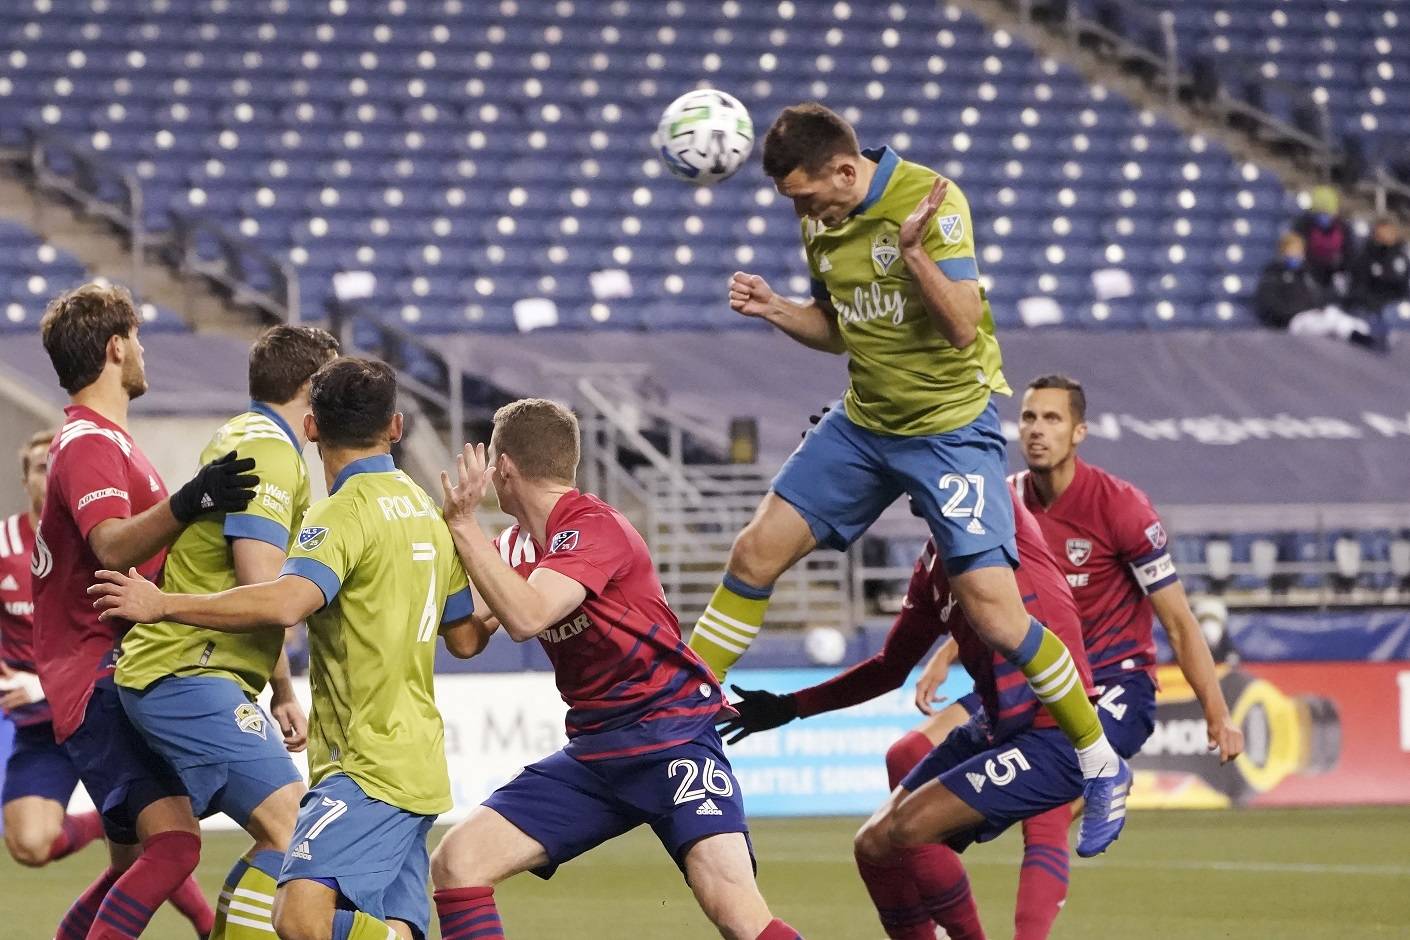 Seattle Sounders defender Shane O’Neill (27) heads in a goal against FC Dallas during the second half of an MLS playoff soccer match, Tuesday in Seattle. (AP Photo/Ted S. Warren)